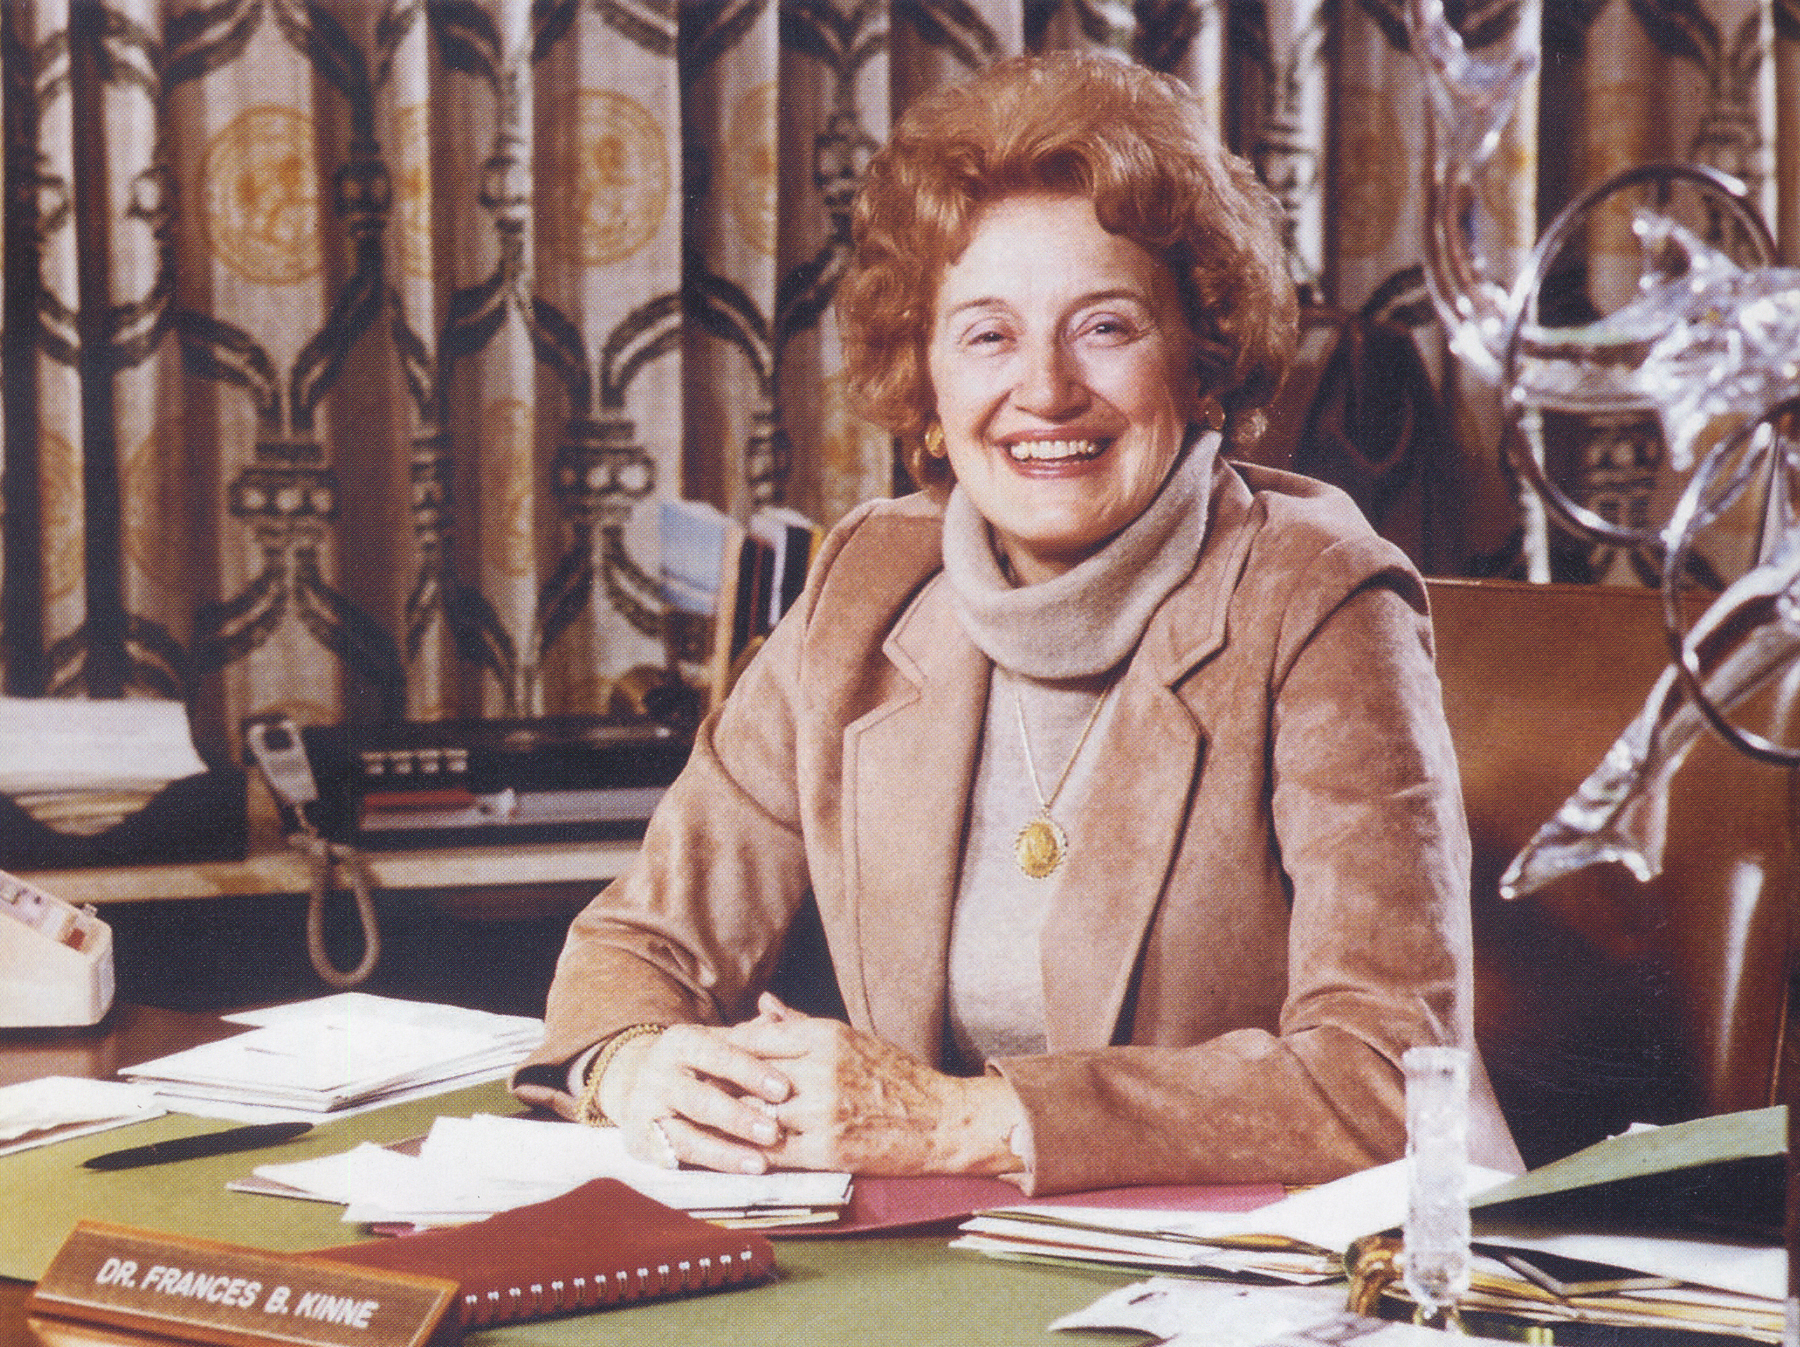 Kinne was named president of JU in 1979, becoming the first female president of a Florida university.